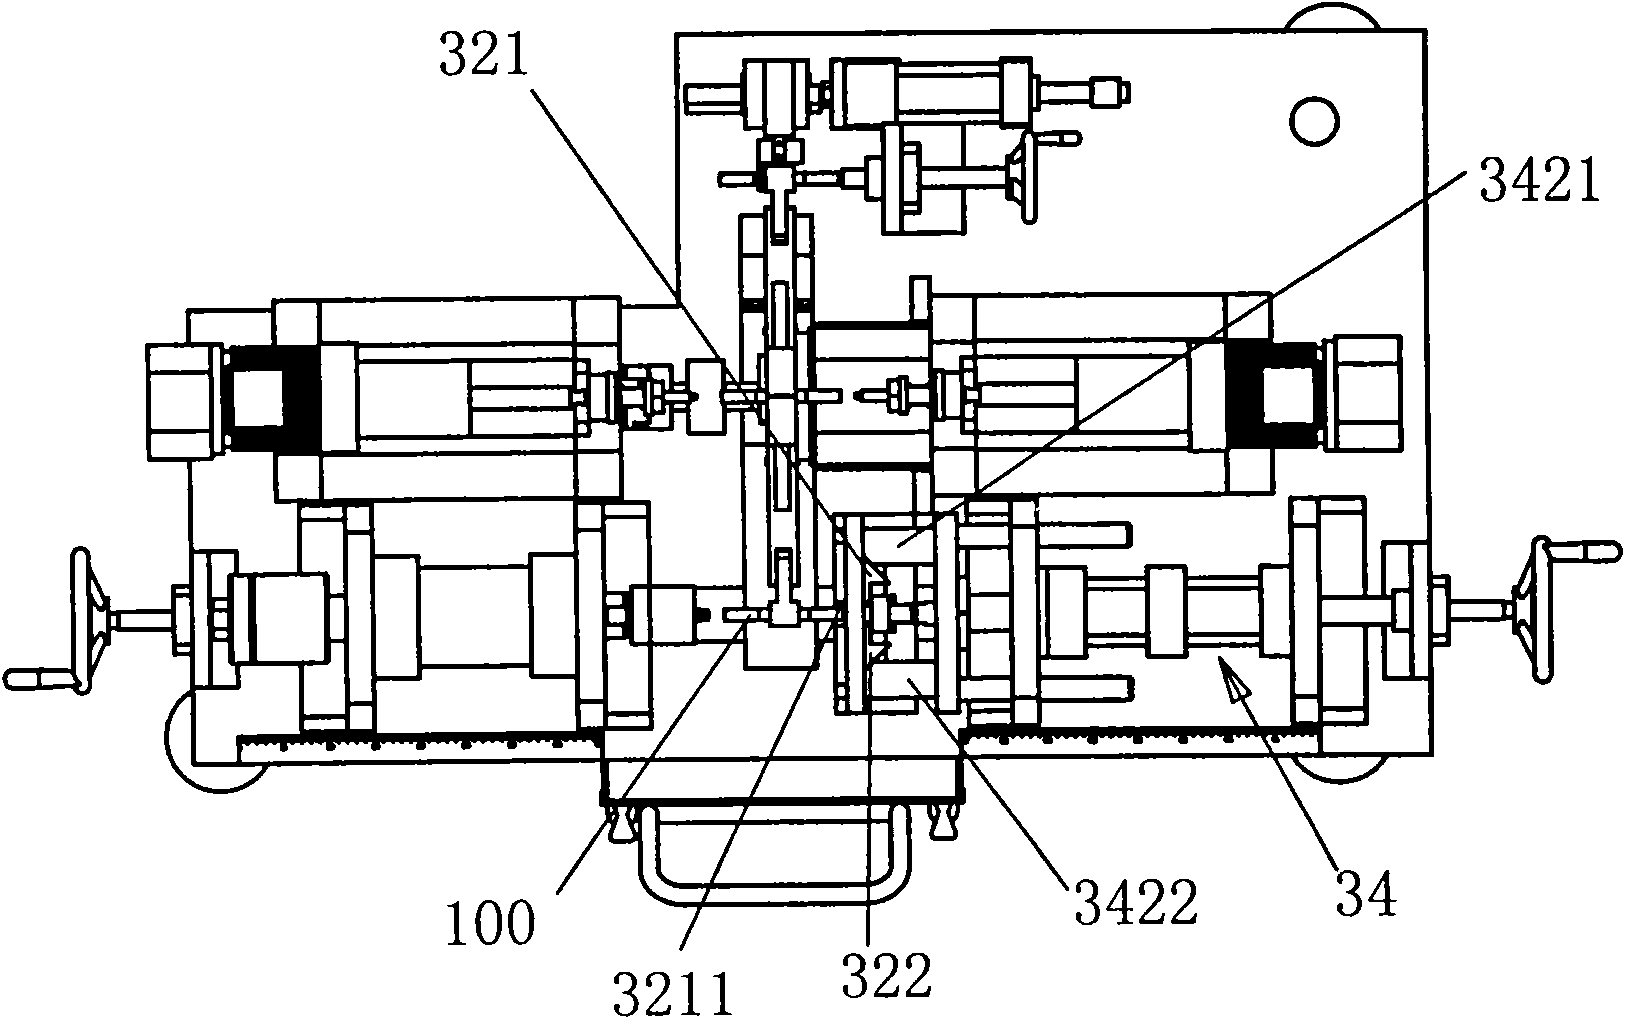 Device for automatically expanding and punching pipe fittings